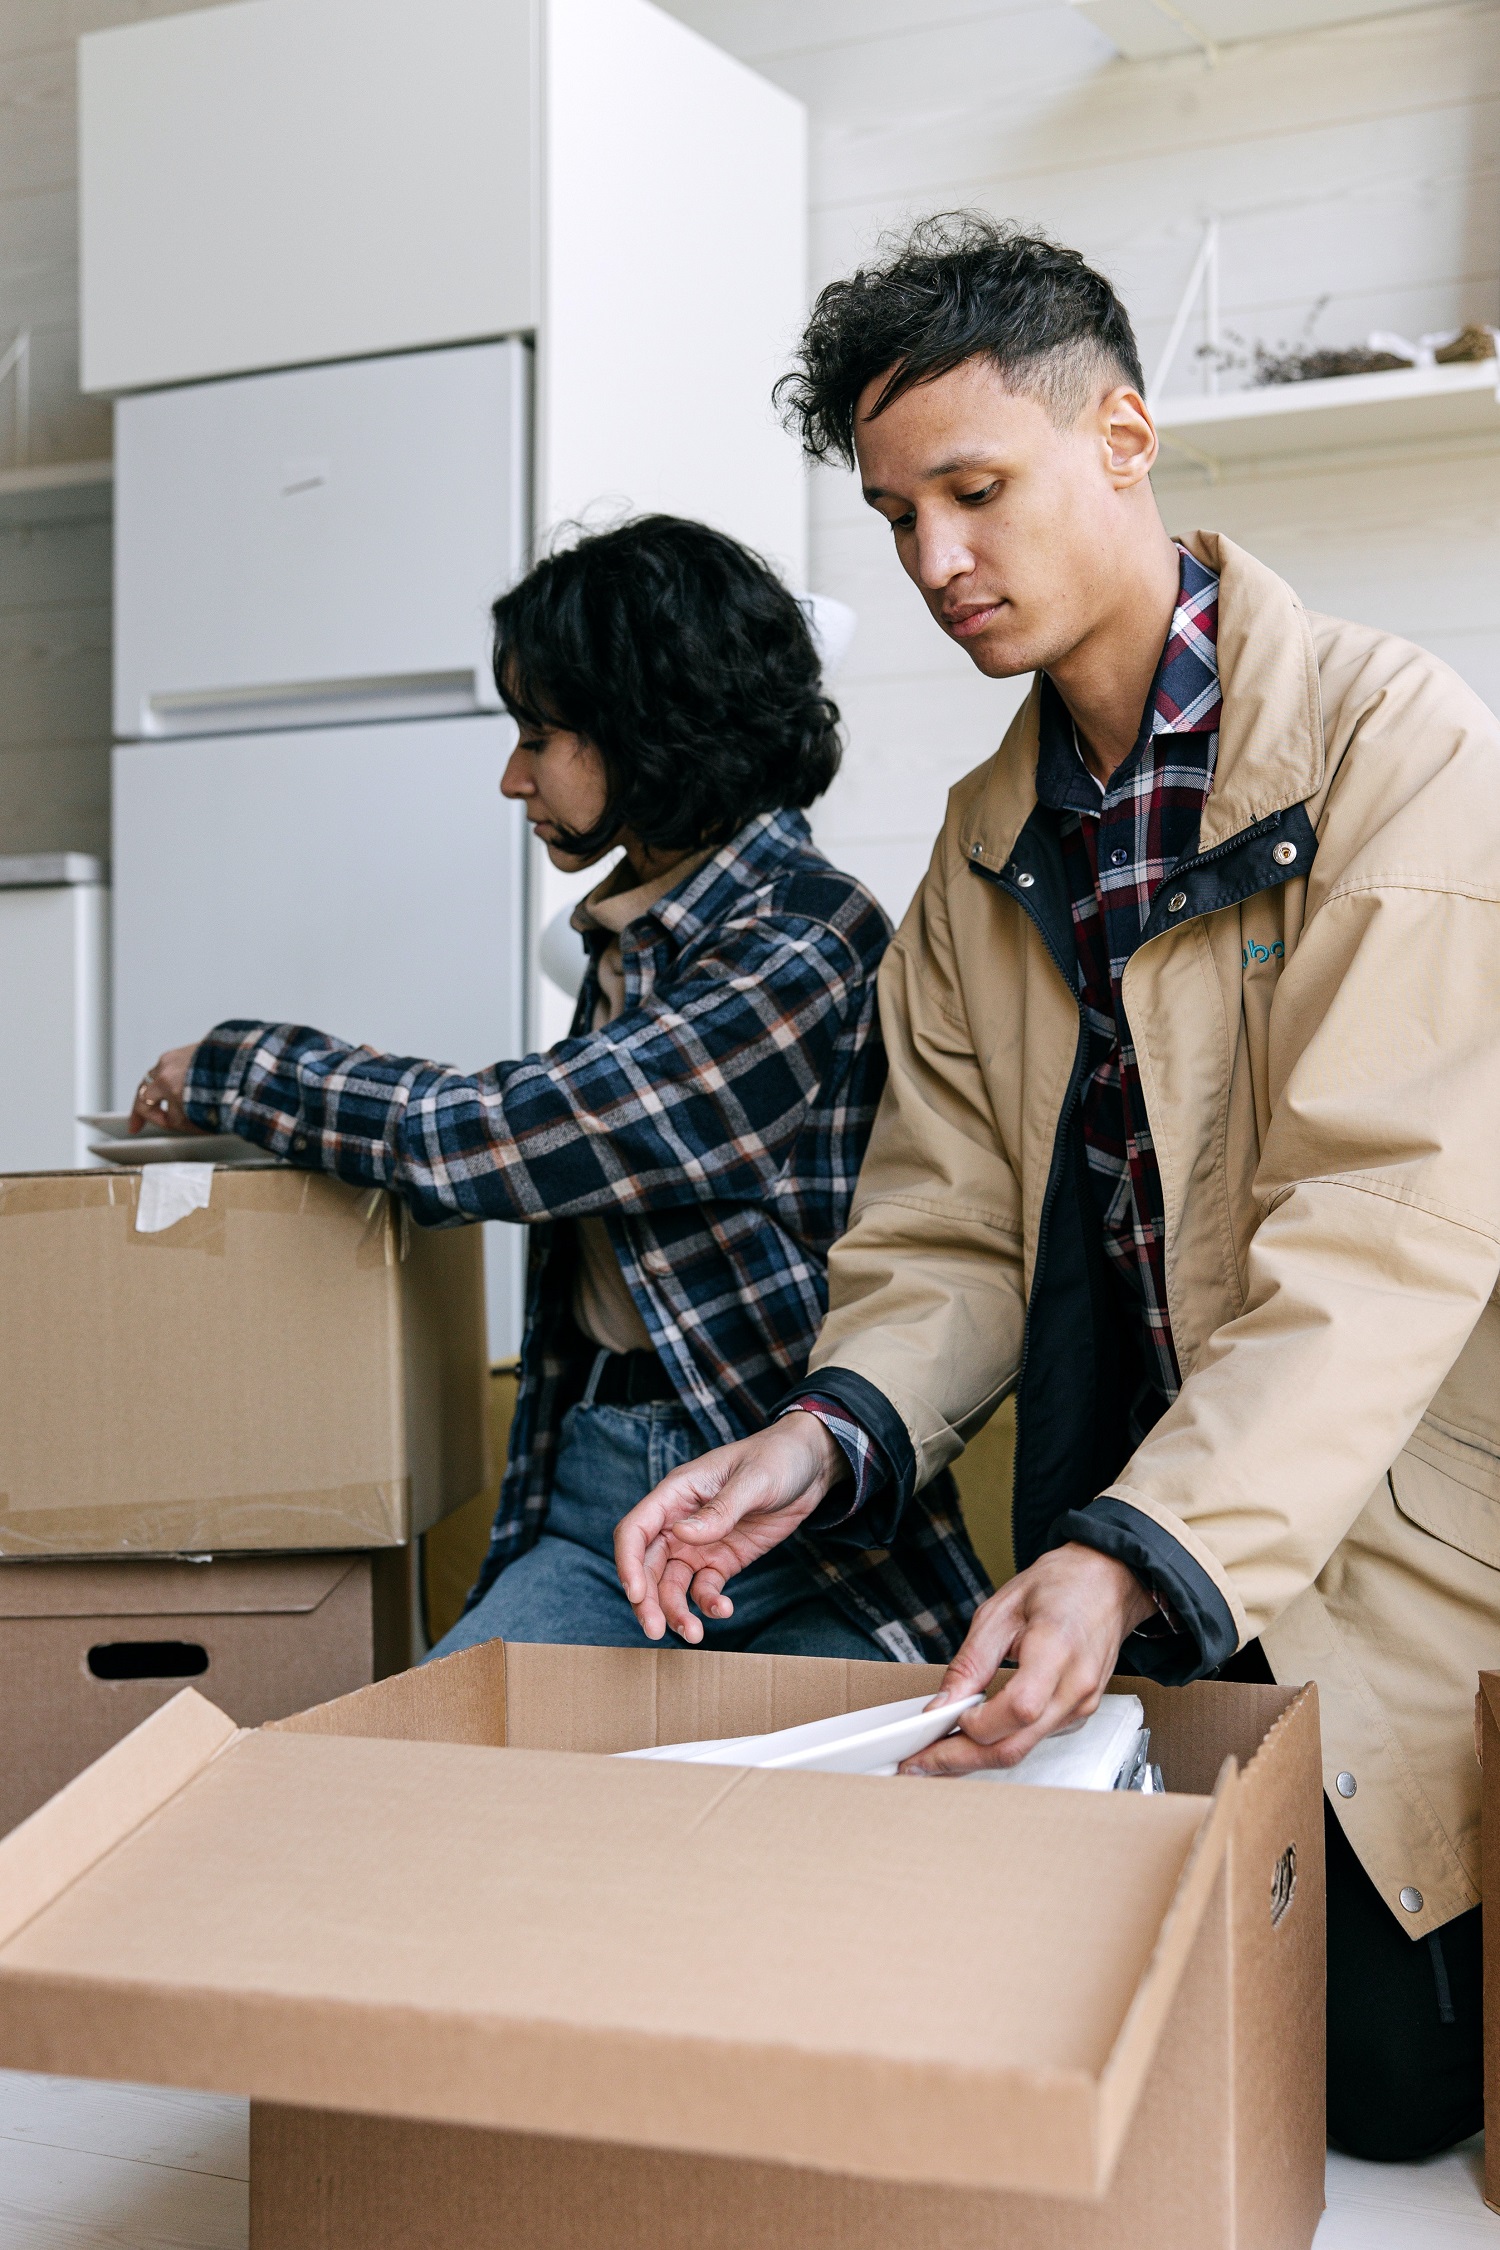 The role of a relocation company in packing and unpacking your belongings